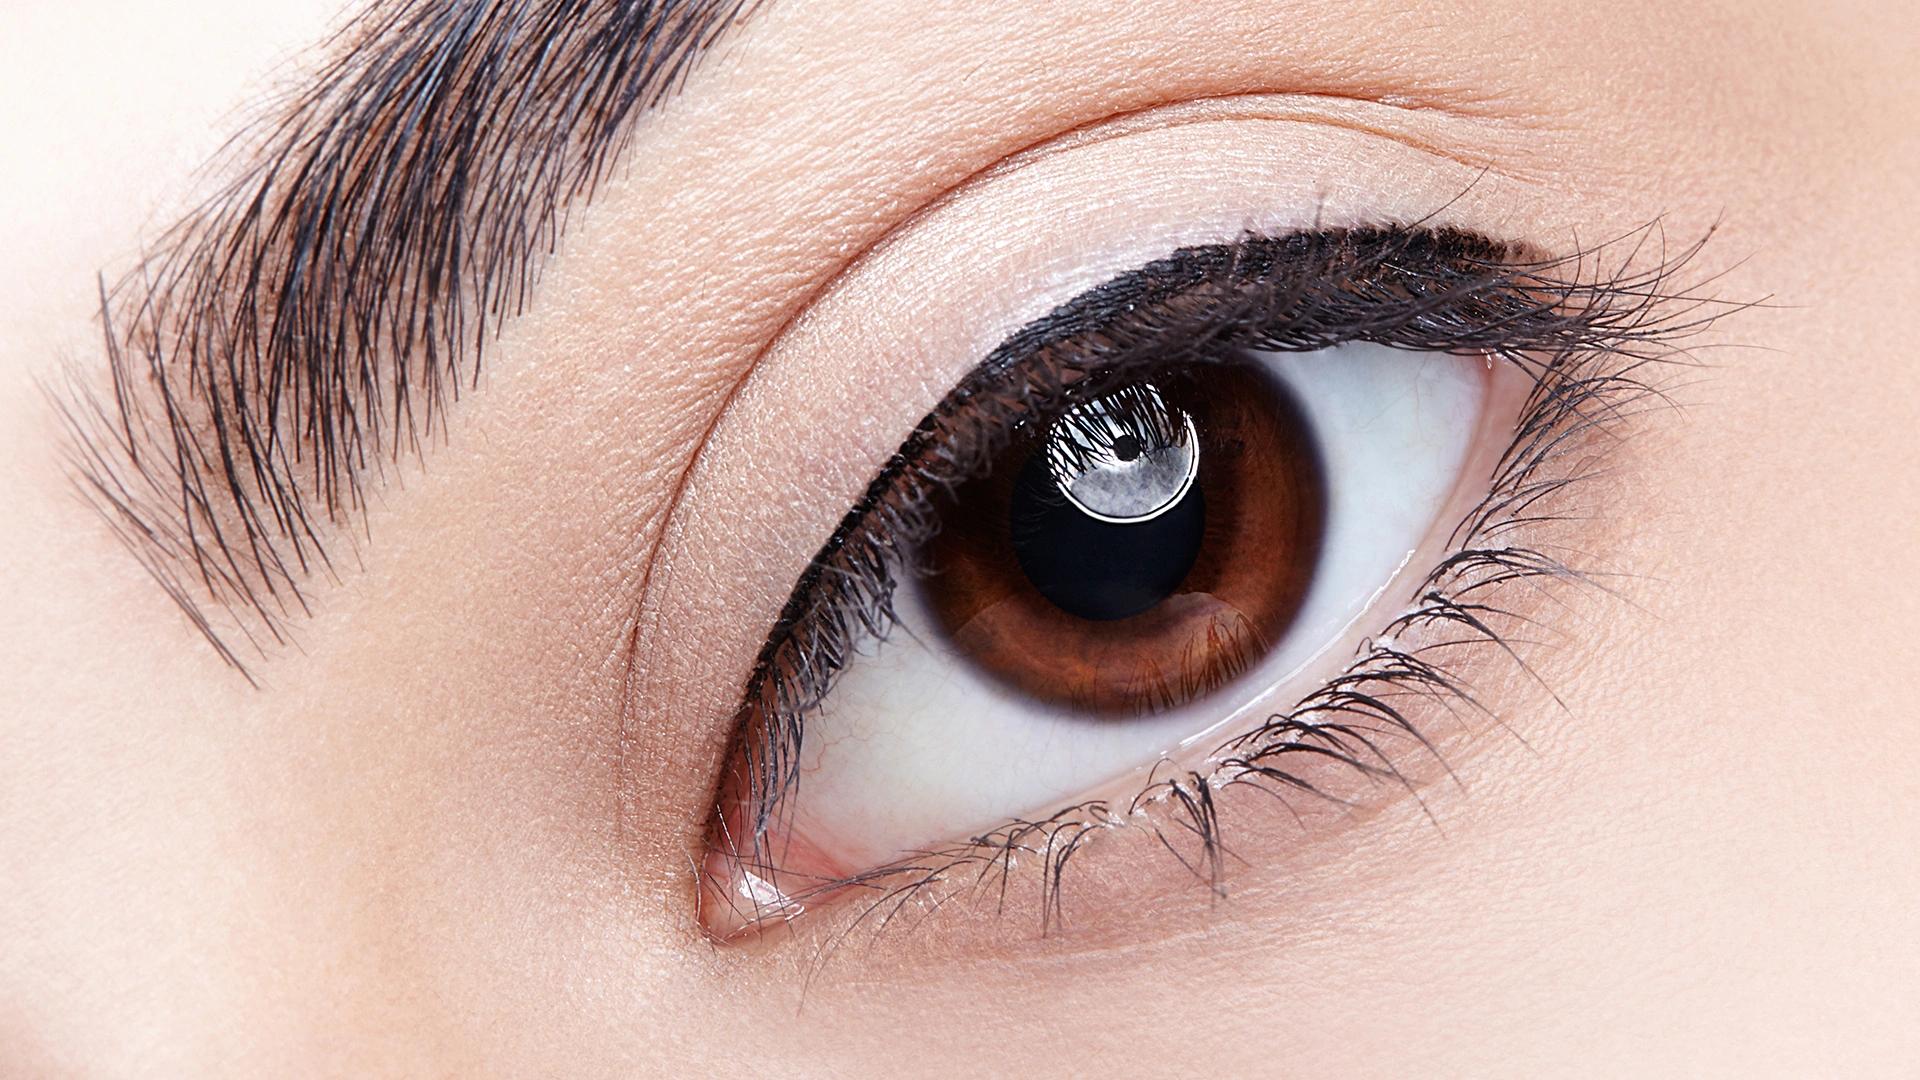 A Secret to Looking Fab 24/7? Full Face Permanent Makeup!